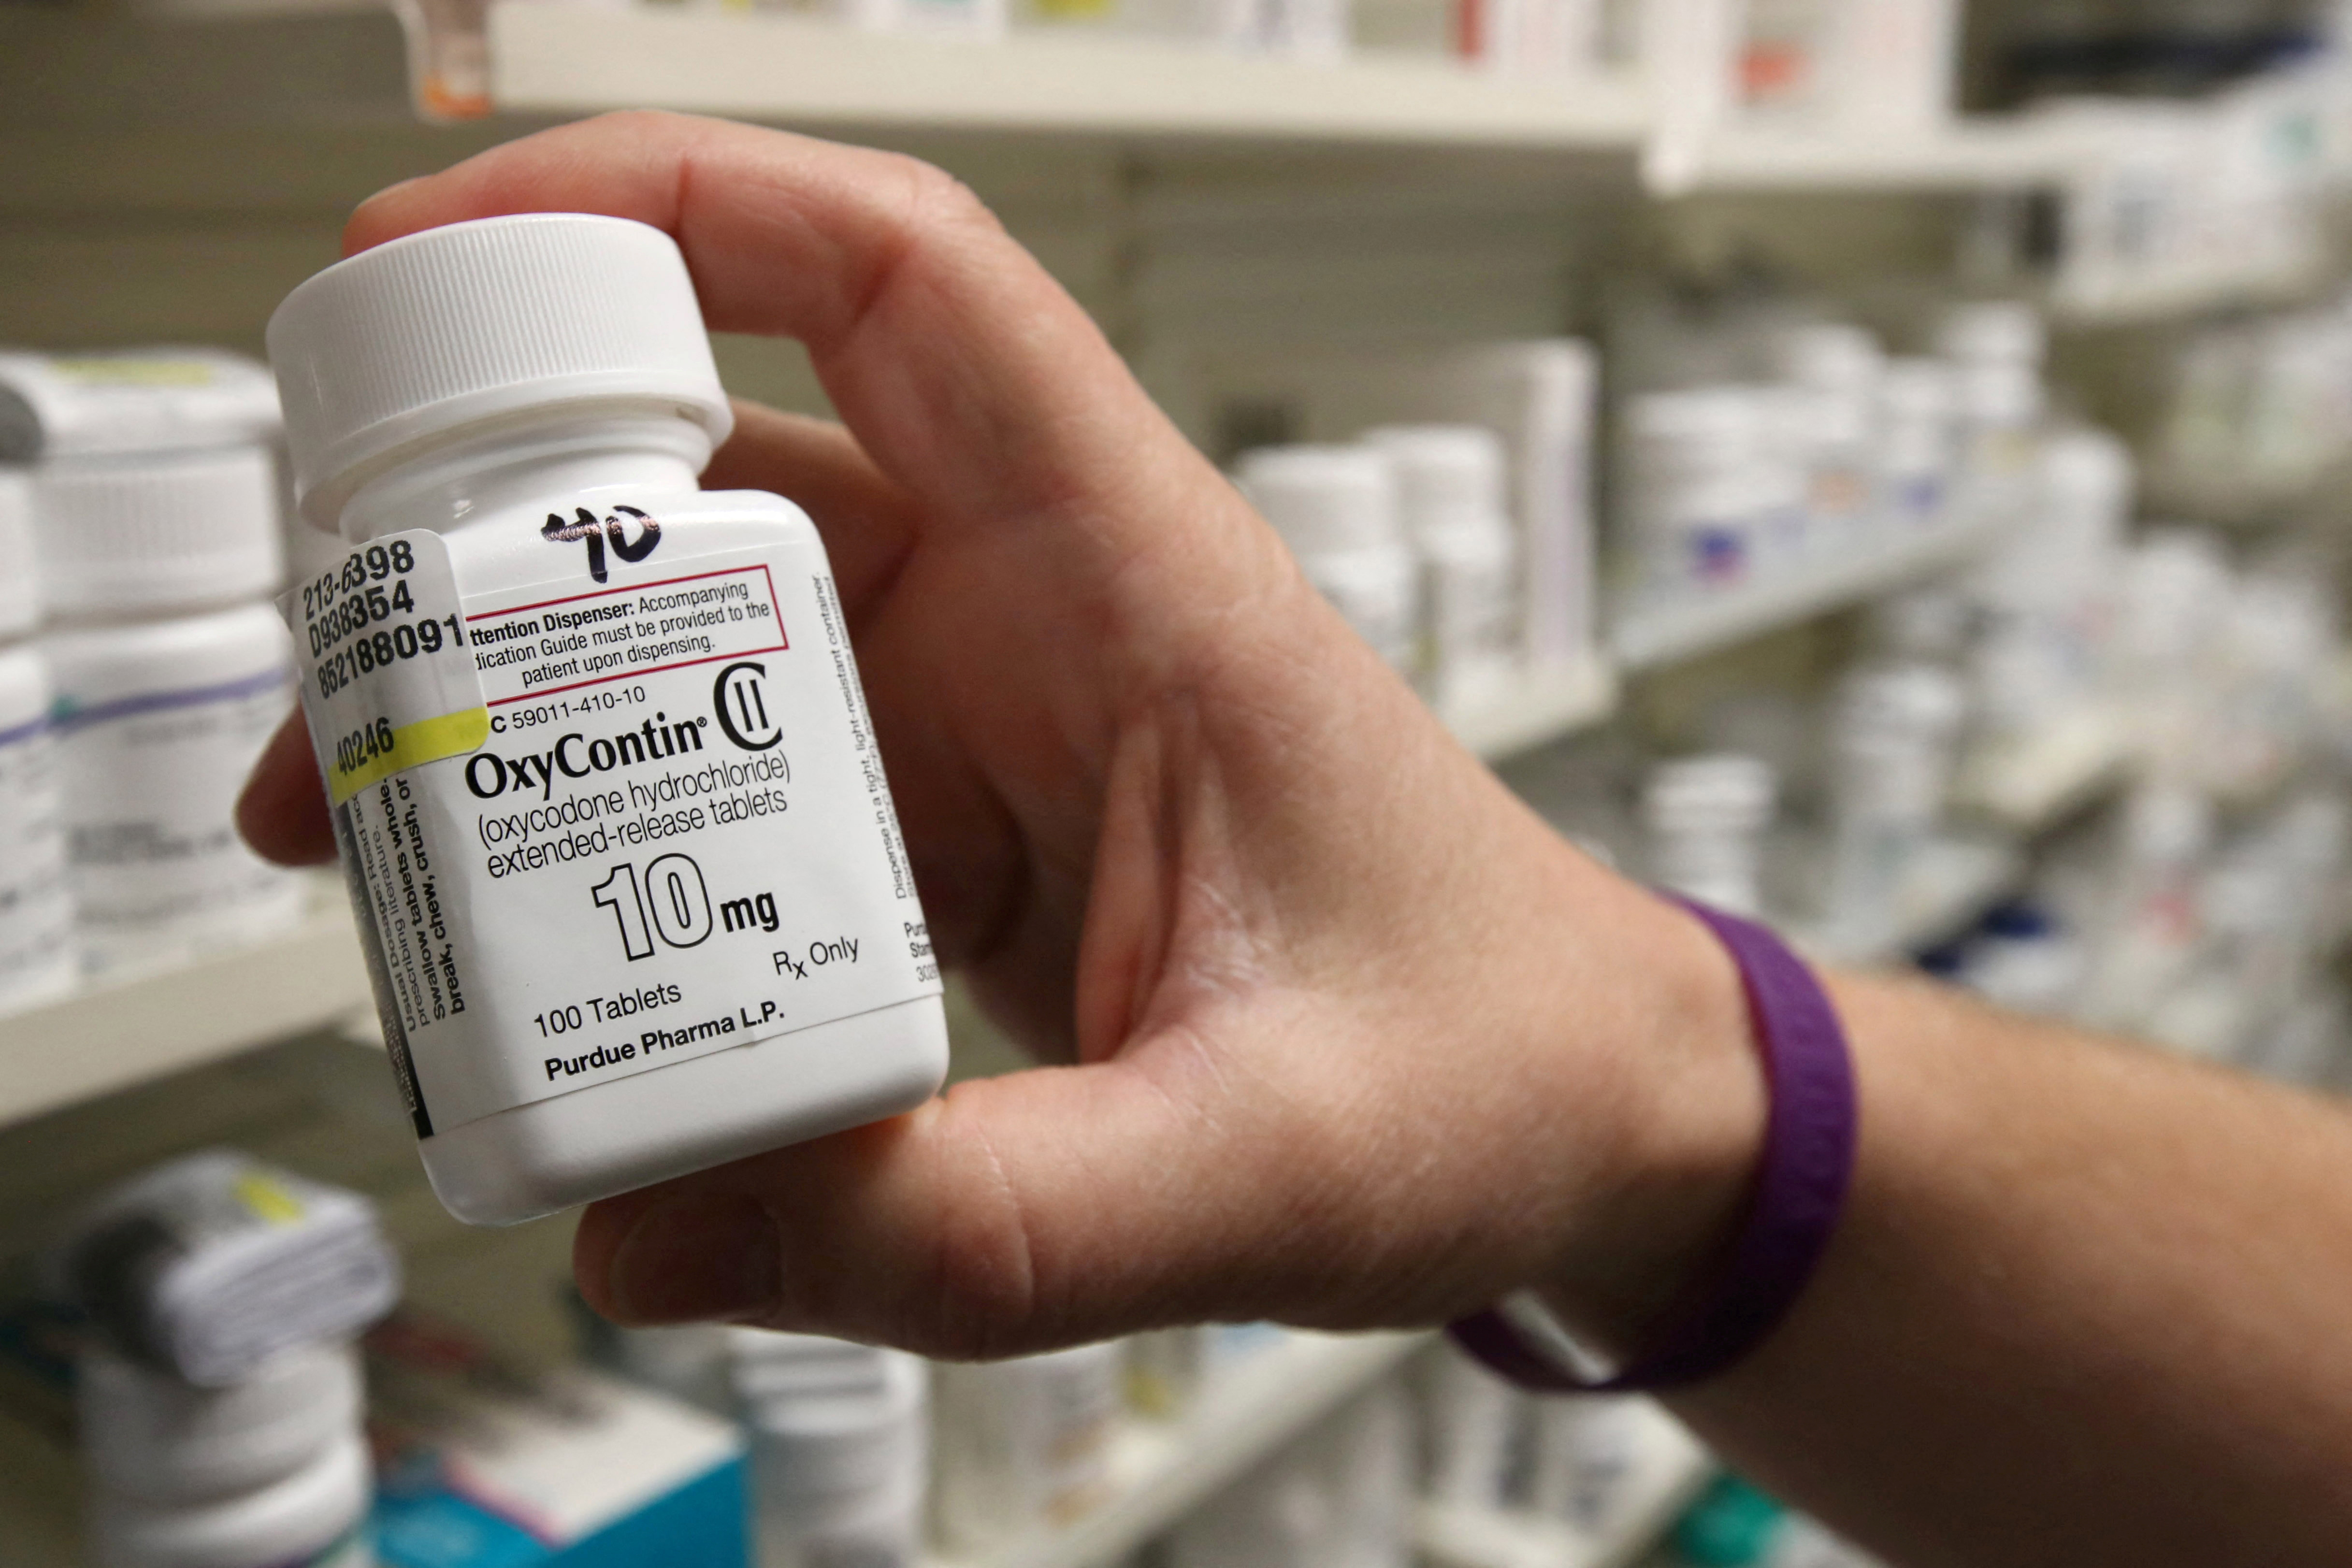 A pharmacist holds a bottle of OxyContin produced by Purdue Pharma at a pharmacy in Provo, Utah